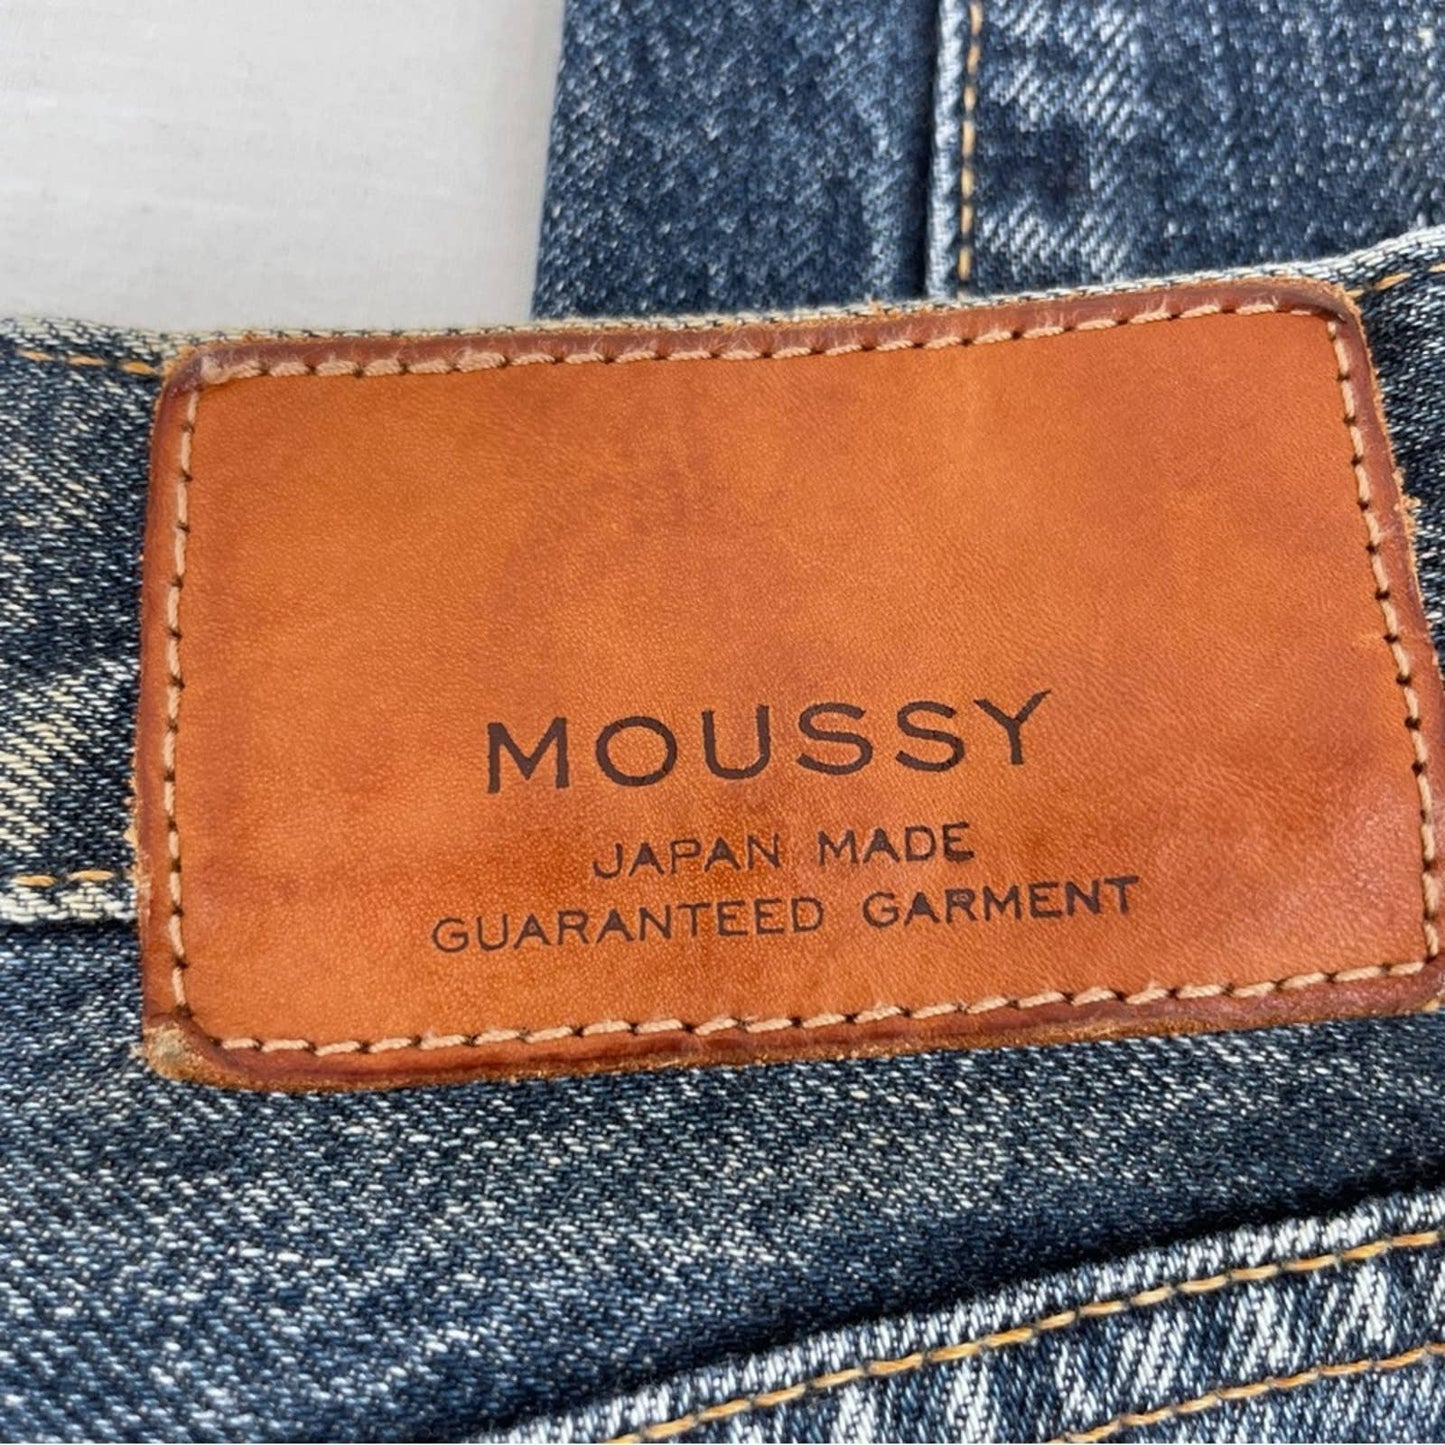 Moussy Denim Premium Distressed Mid Blue Jeans Rips Chewed Hems Style 010AAC11-2690 Size 29